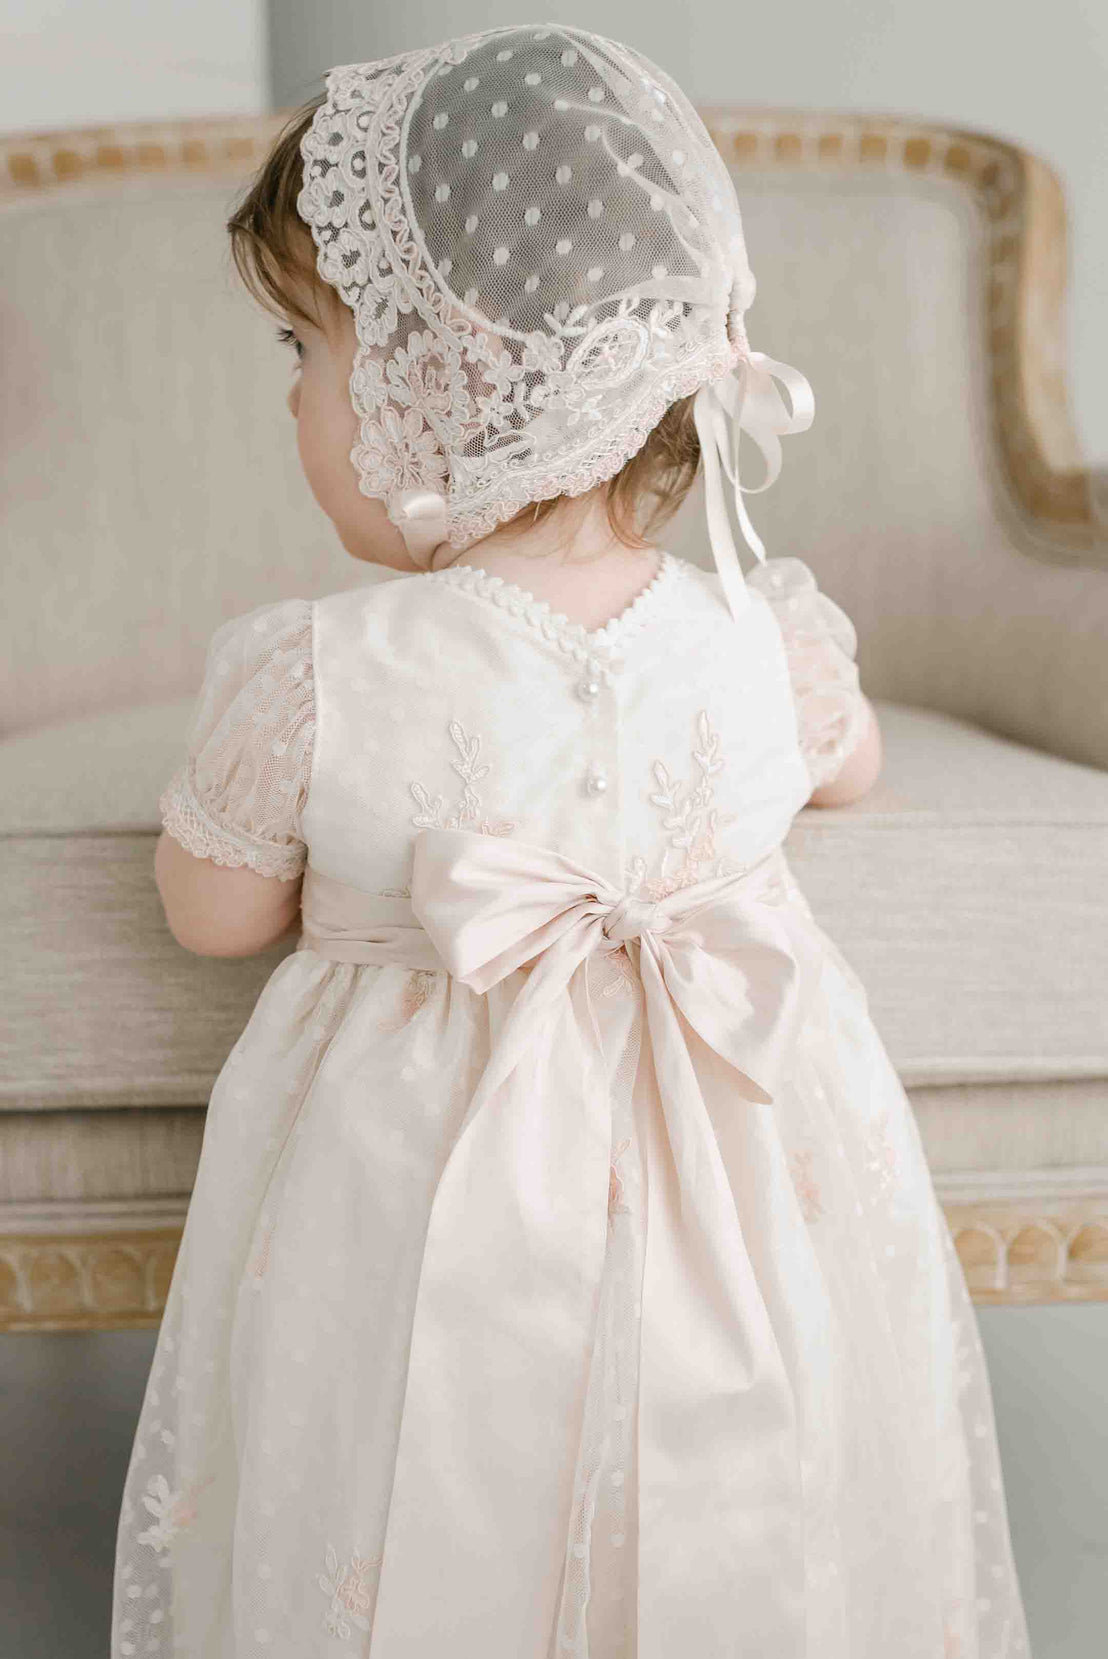 A baby girl in an Elizabeth Christening Gown & Bonnet stands facing away from the camera, focusing on something off-camera, in a softly lit room.